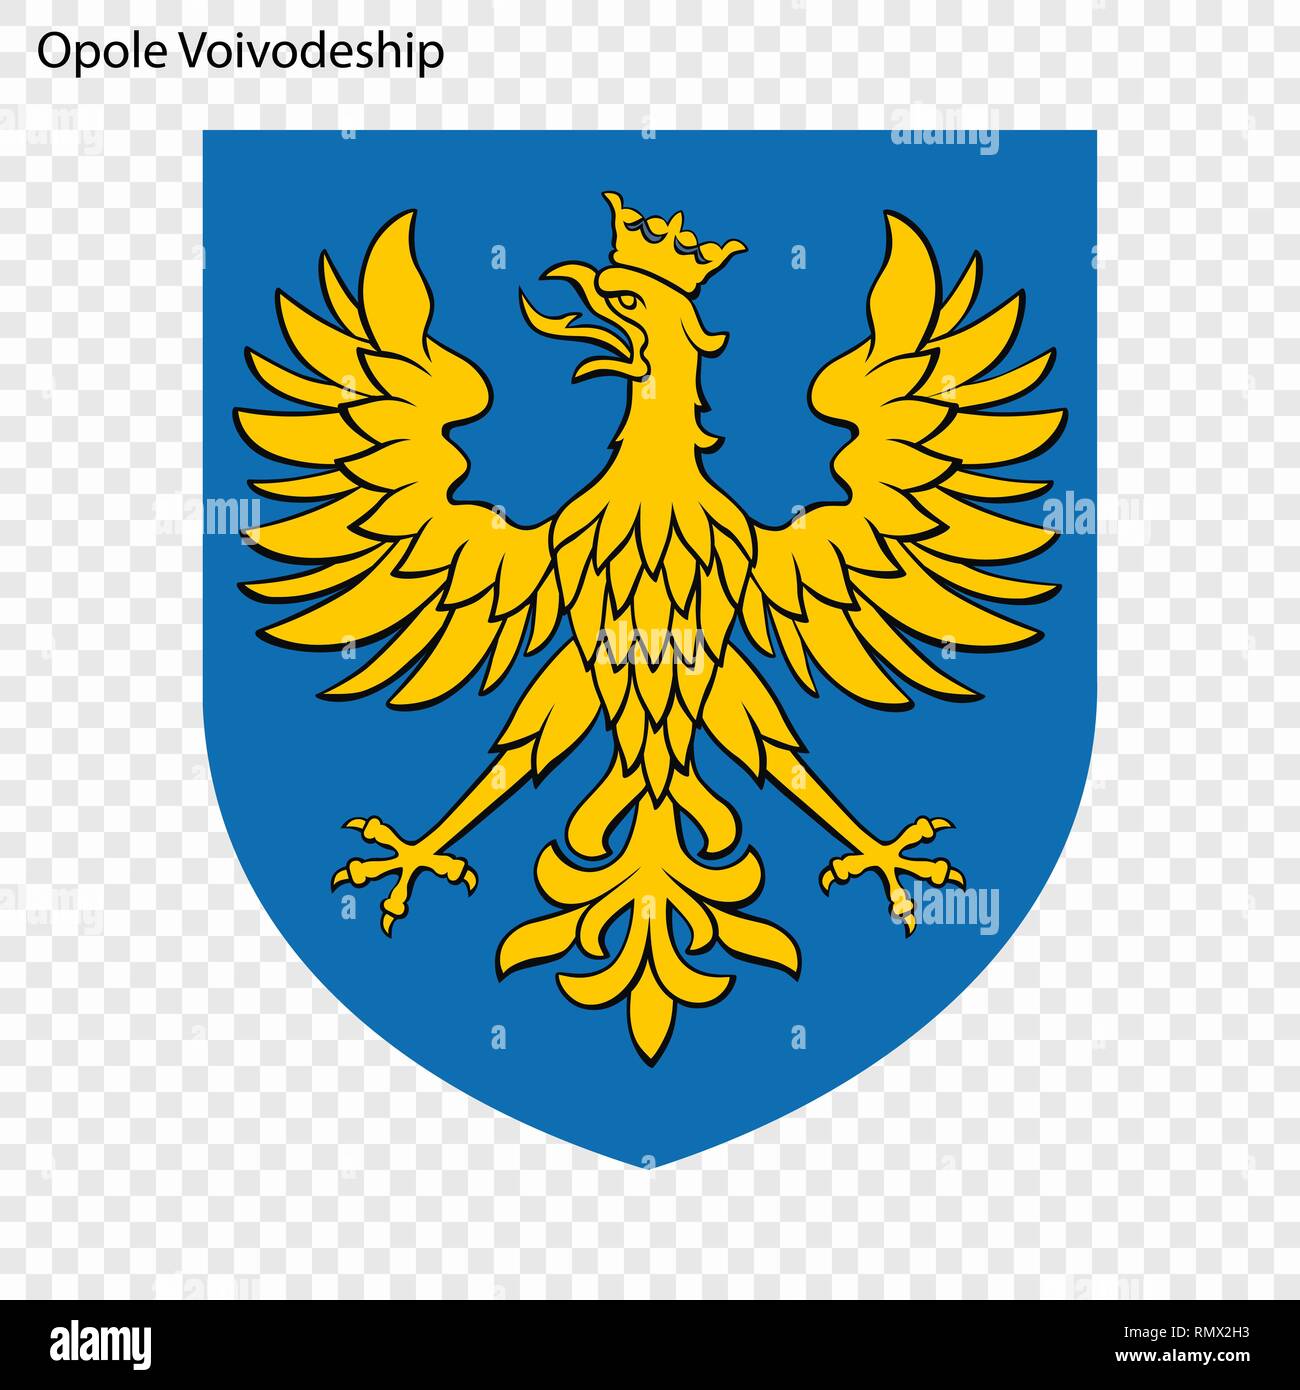 Emblem of Opole Voivodeship, state of Poland. Vector illustration Stock Vector